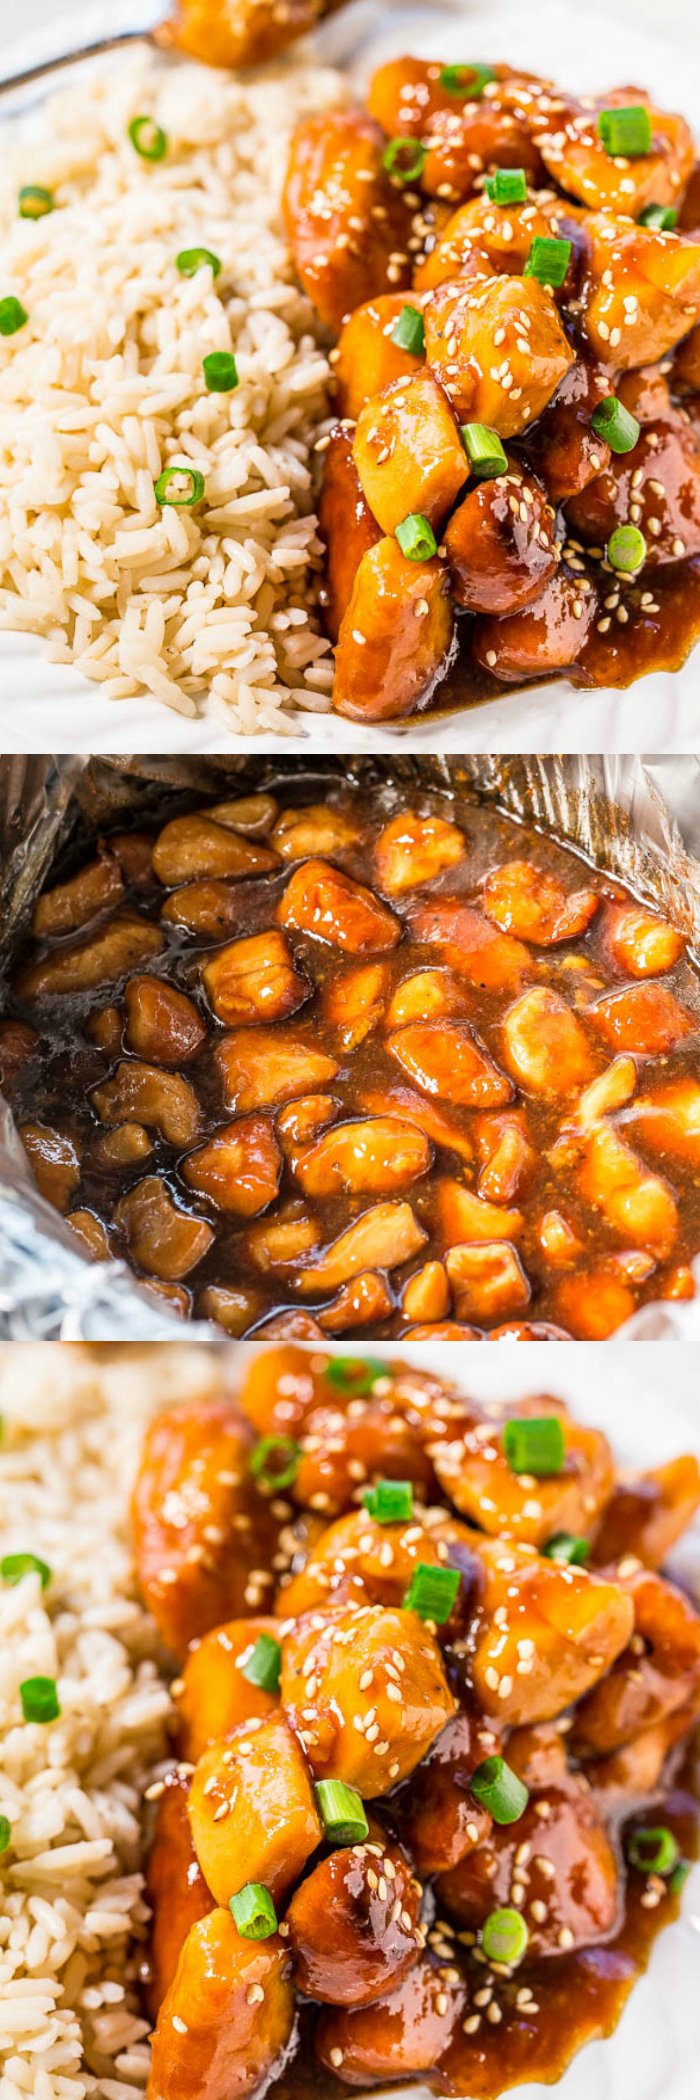 Slow Cooker Orange Chicken - The easiest orange chicken ever because your slow cooker does all the work!! Super juicy, tender, and coated with a sweet-yet-tangy orange glaze that's irresistible!!